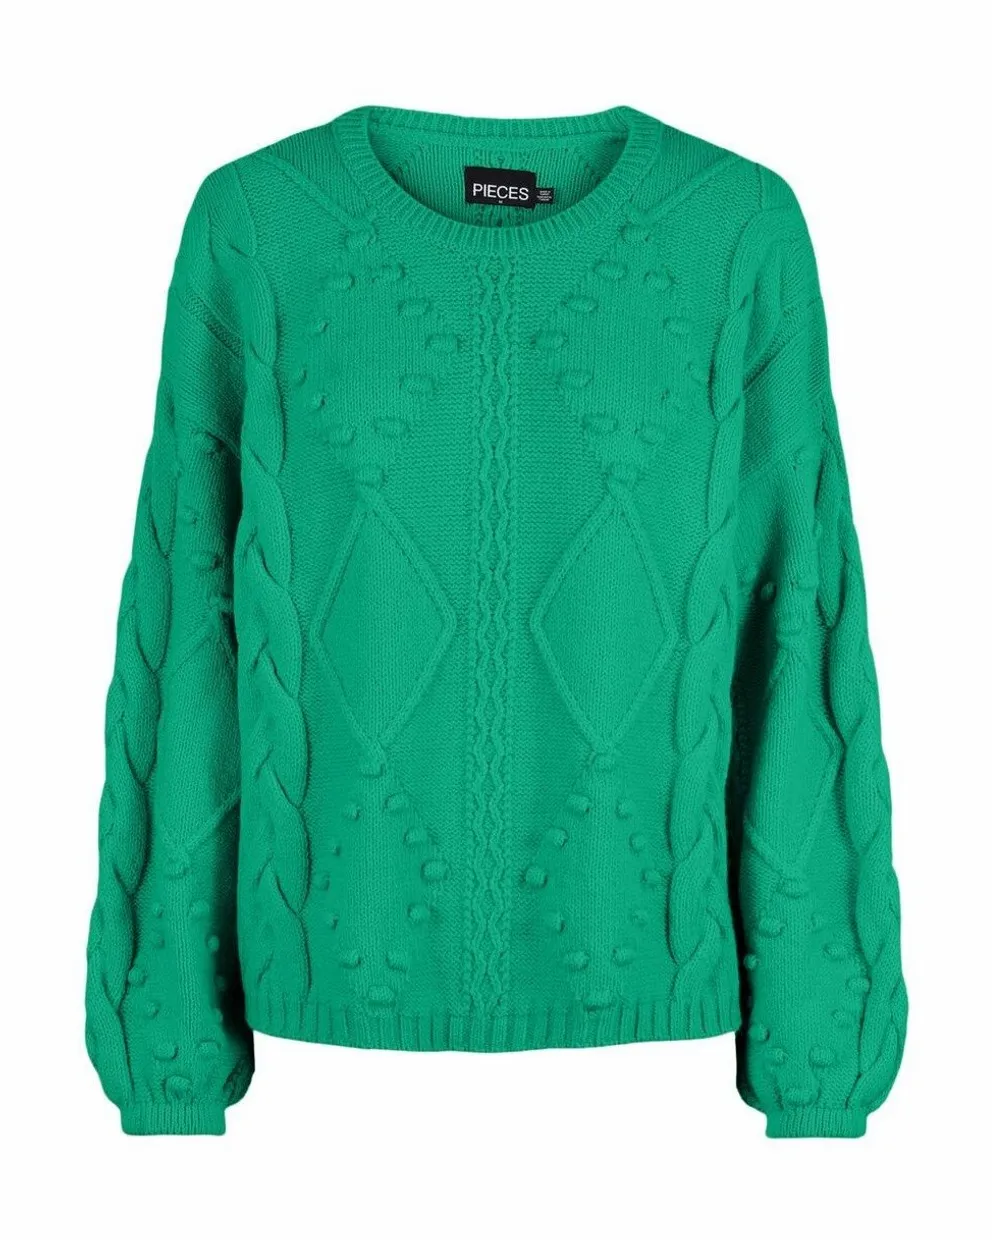 Donsi cable knit green